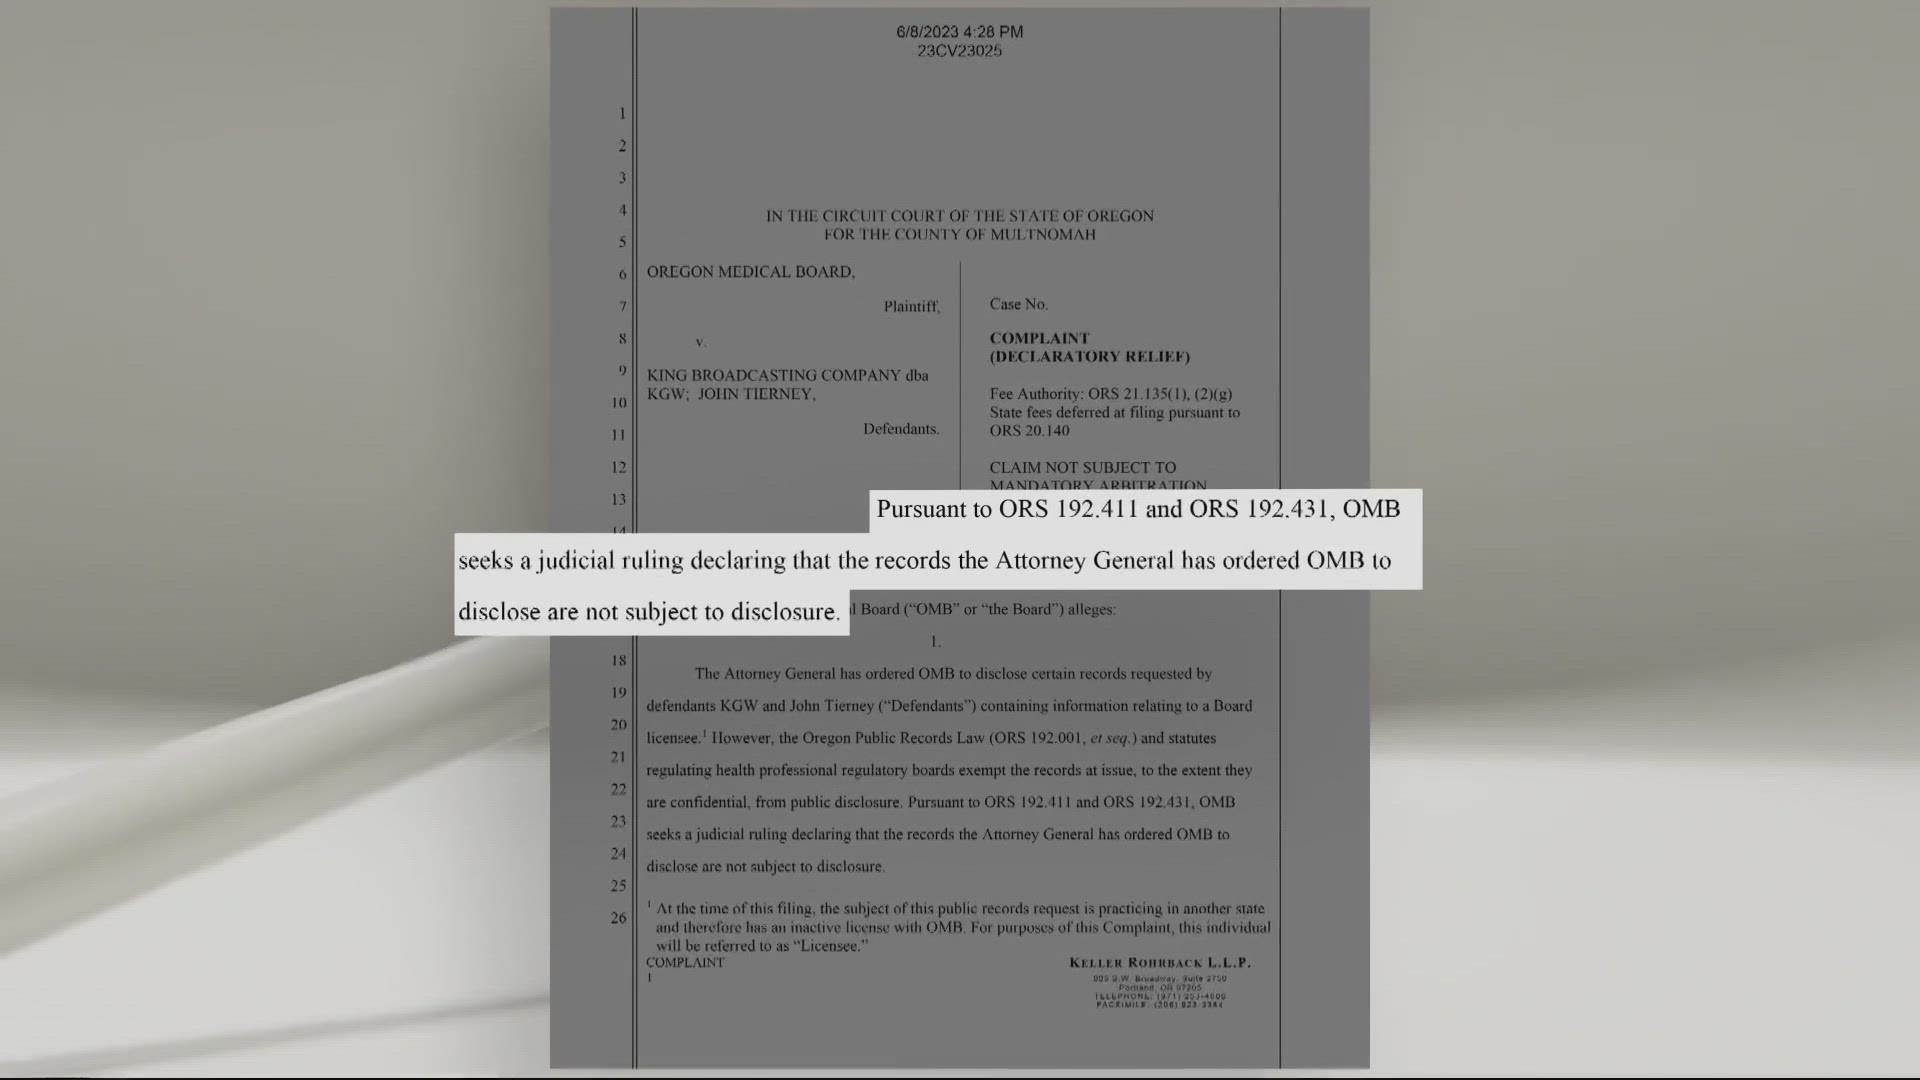 KGW has been fighting to obtain records from the Oregon Medical Board about a doctor accused of sexual battery. The board has been trying to keep the records private